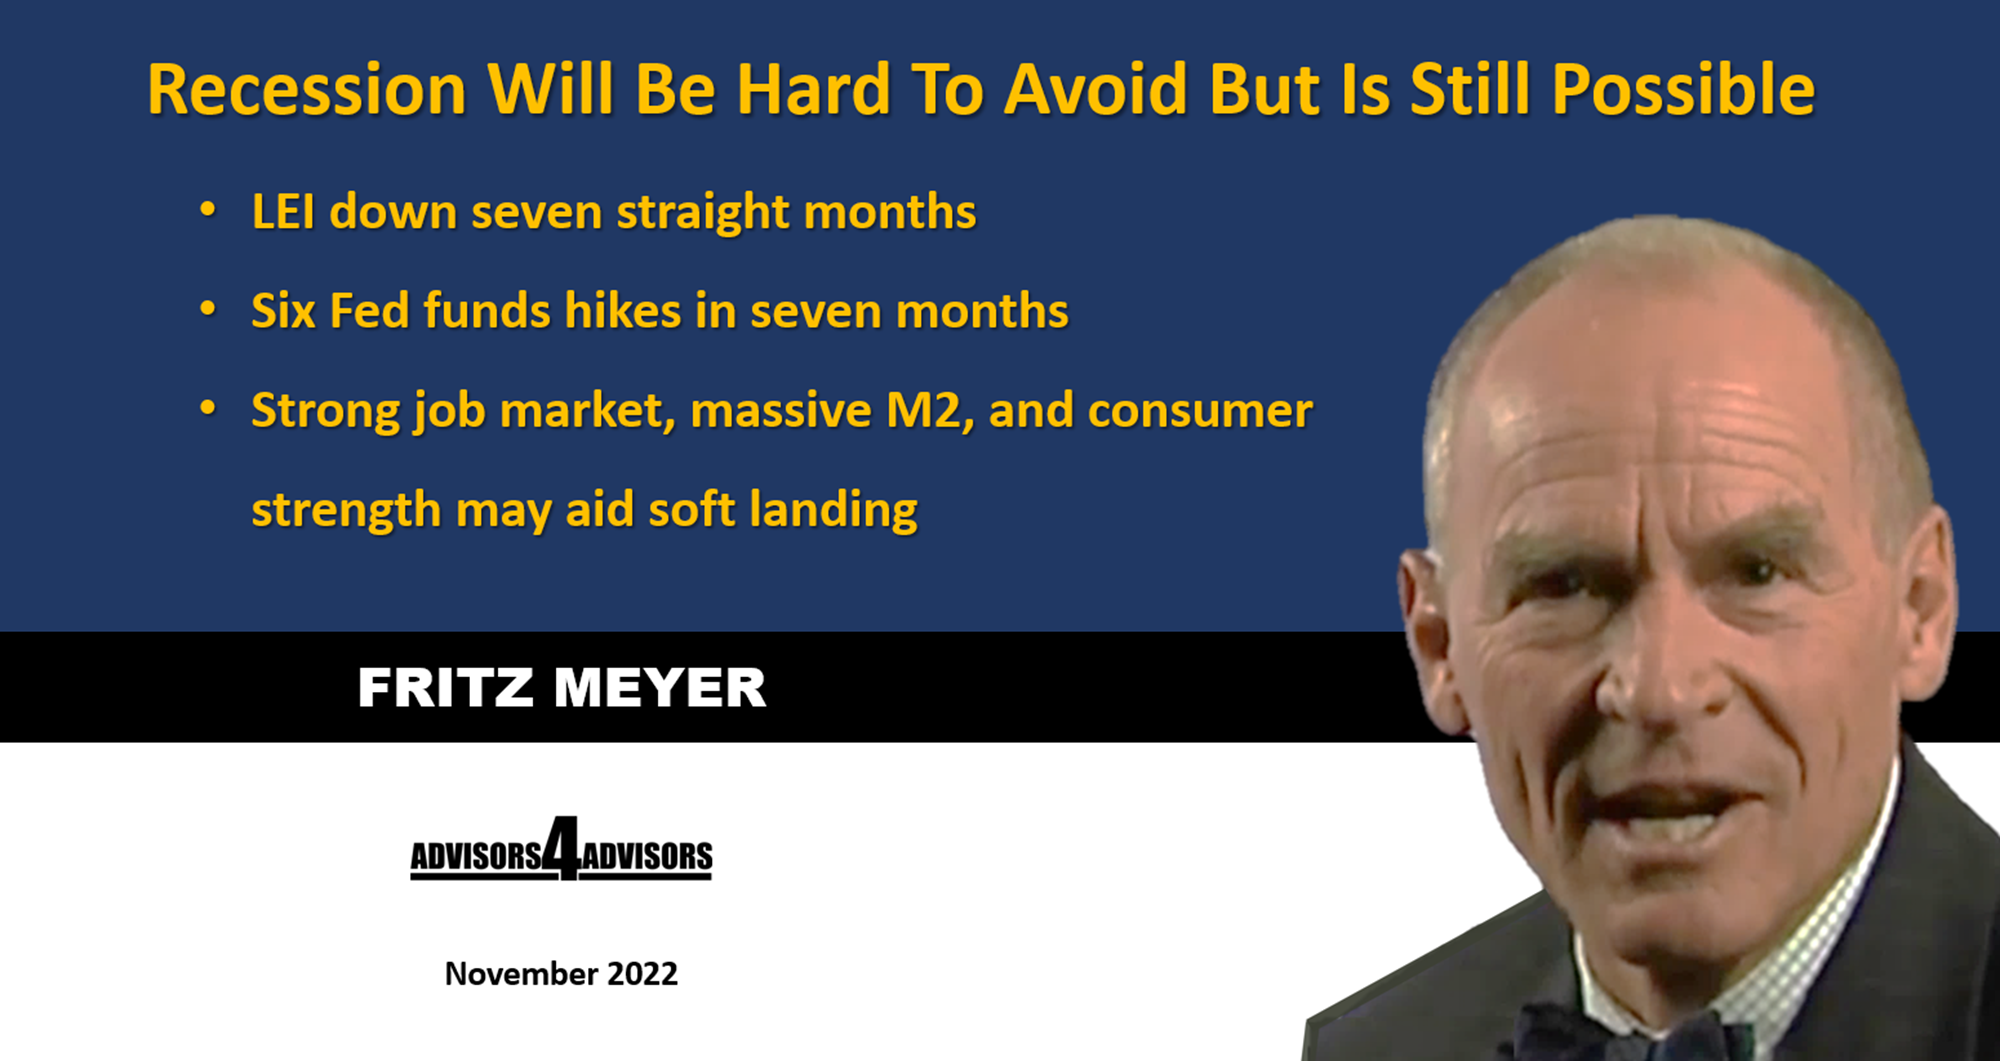 Fed Not Done Hiking Rates But A Soft Landing Is Still Possible,  Fritz Meyer Economic Update, November 2022  